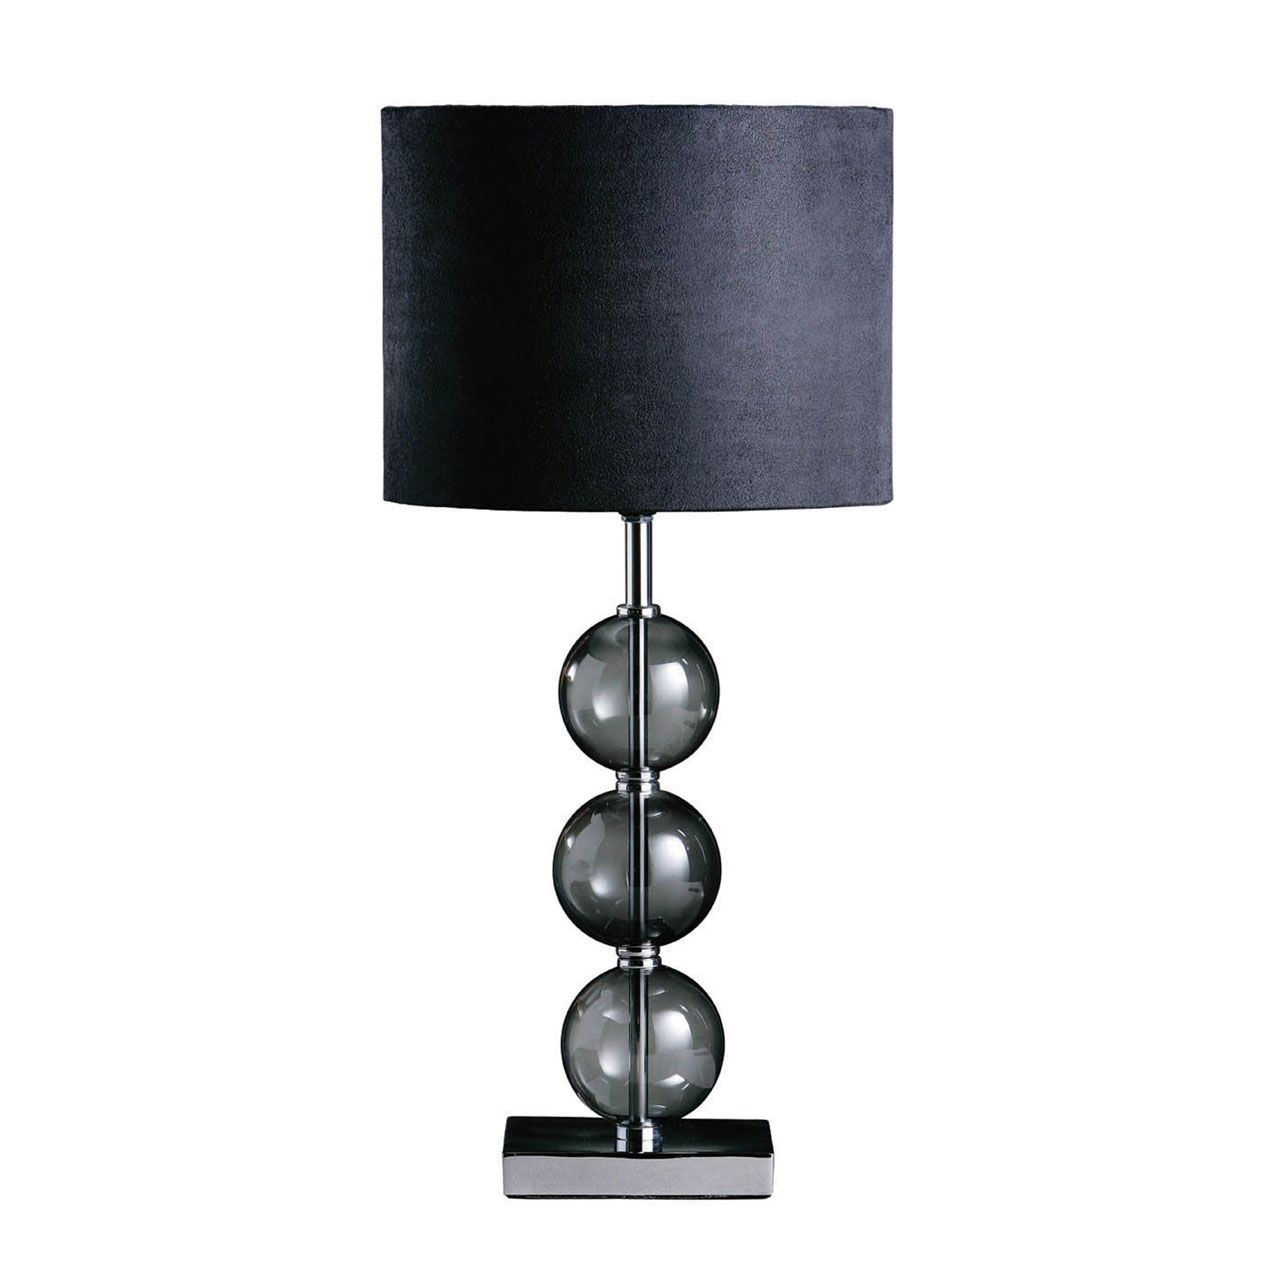 Mistro Black Fabric Shade Table Lamp With Chrome Metal Base